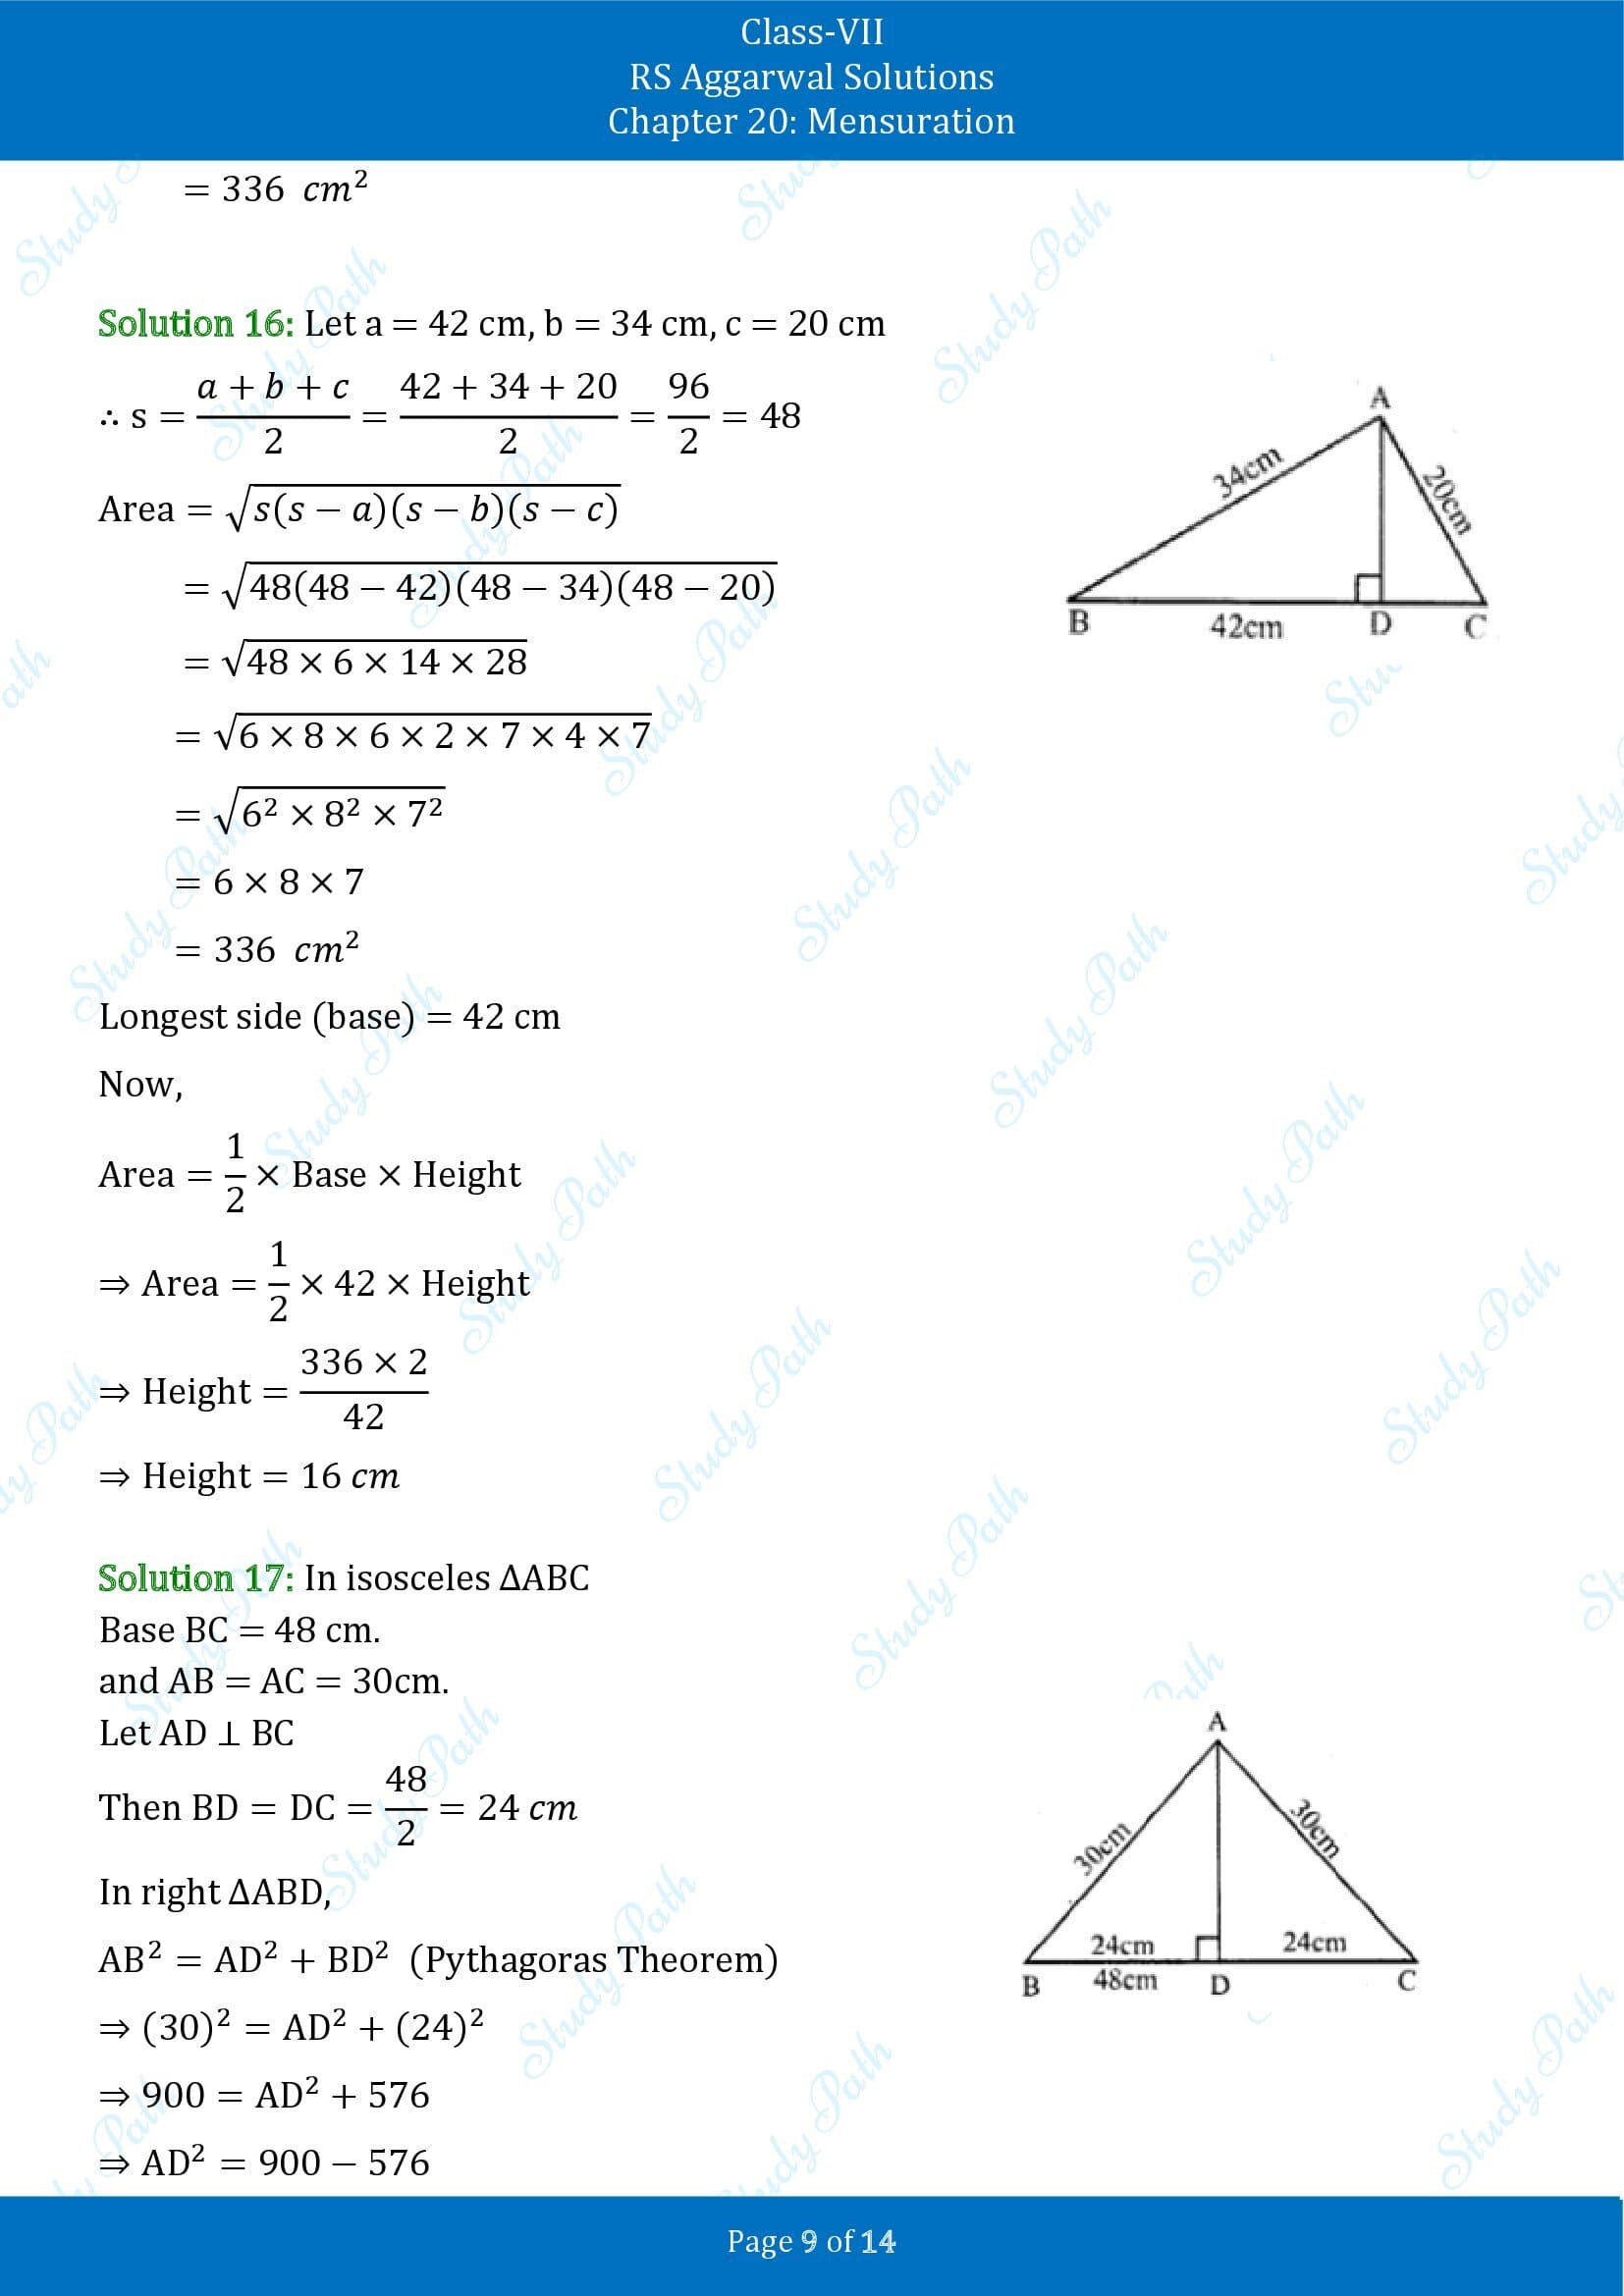 RS Aggarwal Solutions Class 7 Chapter 20 Mensuration Exercise 20D 00009